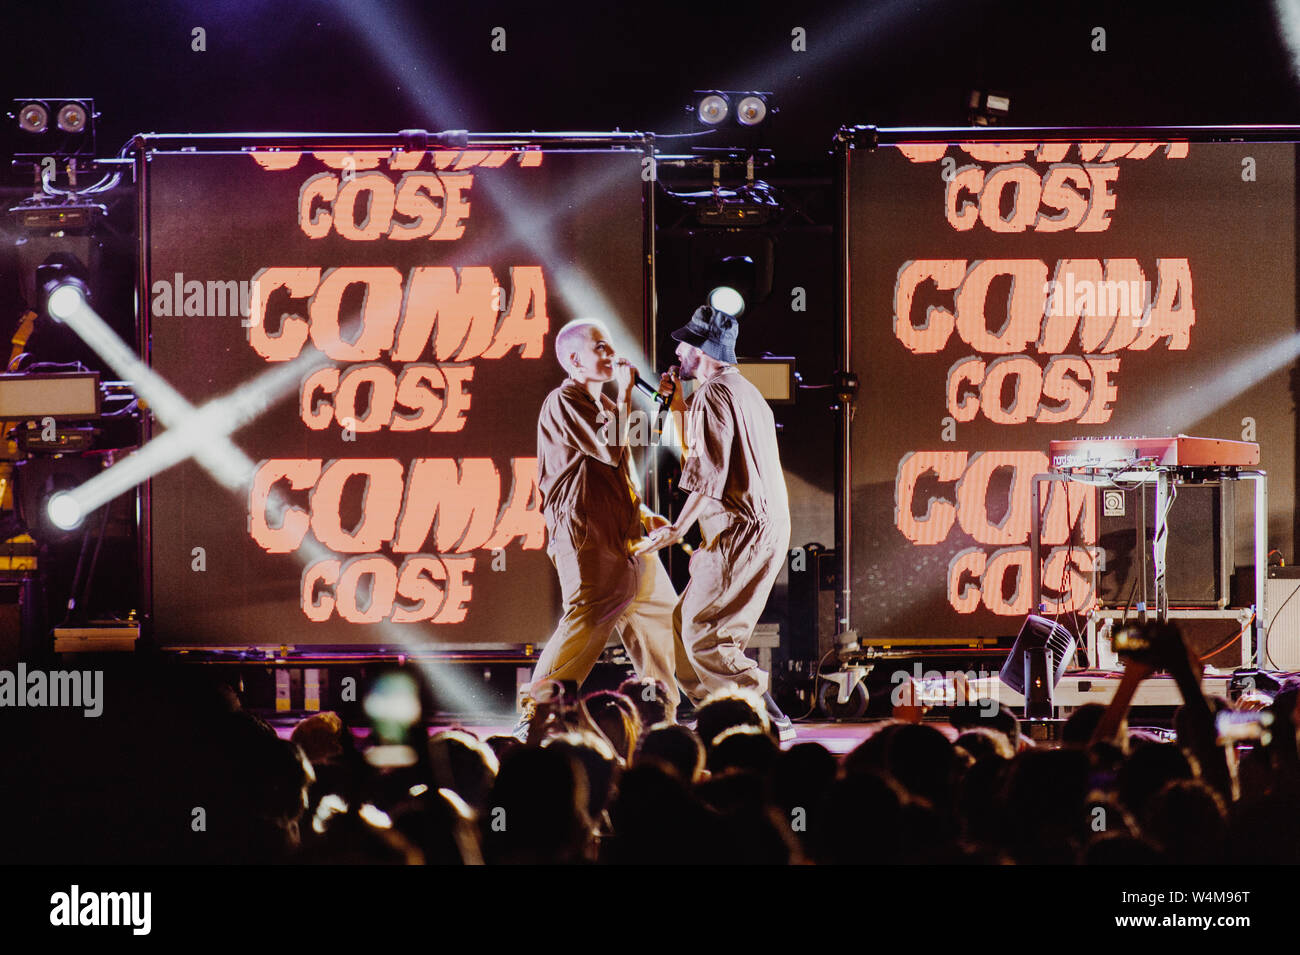 Turin, Italy, 19 July 2019. Coma Cose perform live at GruVillage Festival © Giulia Manfieri / Alamy Stock Photo